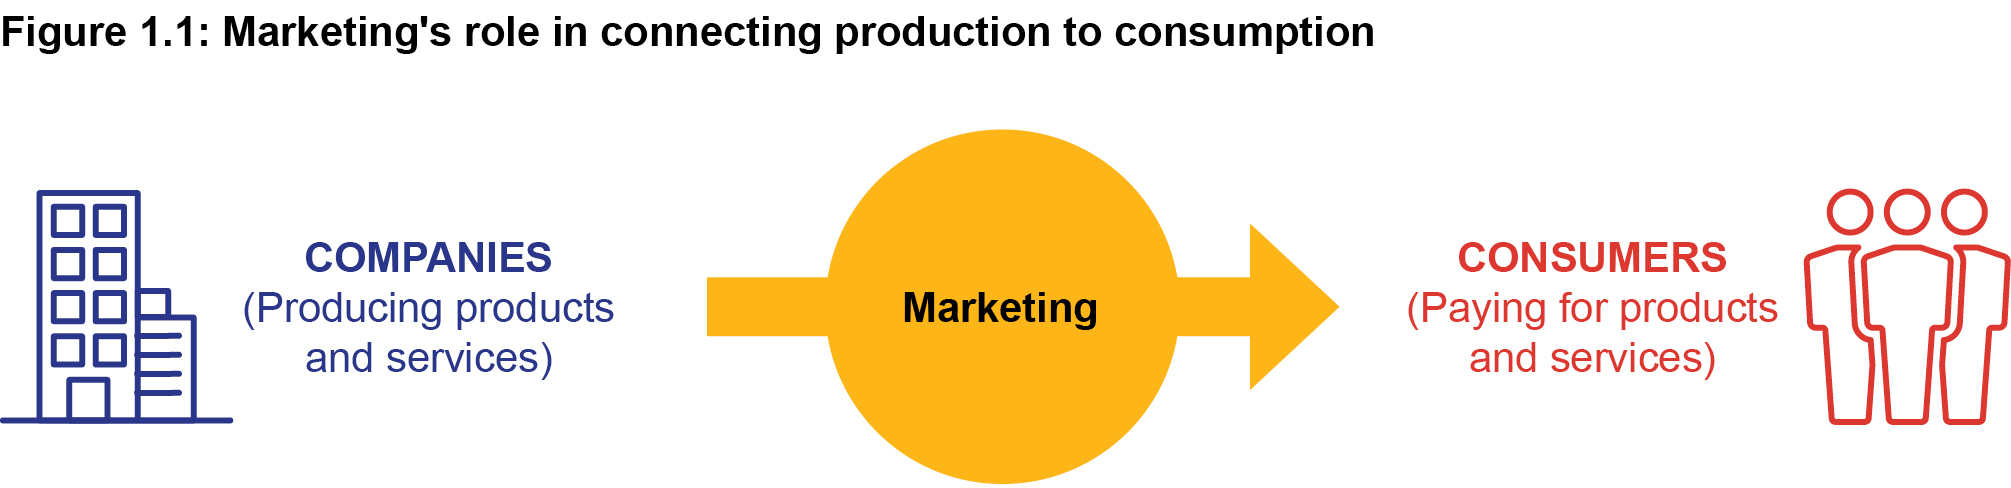 marketing's role in connecting production to consumption